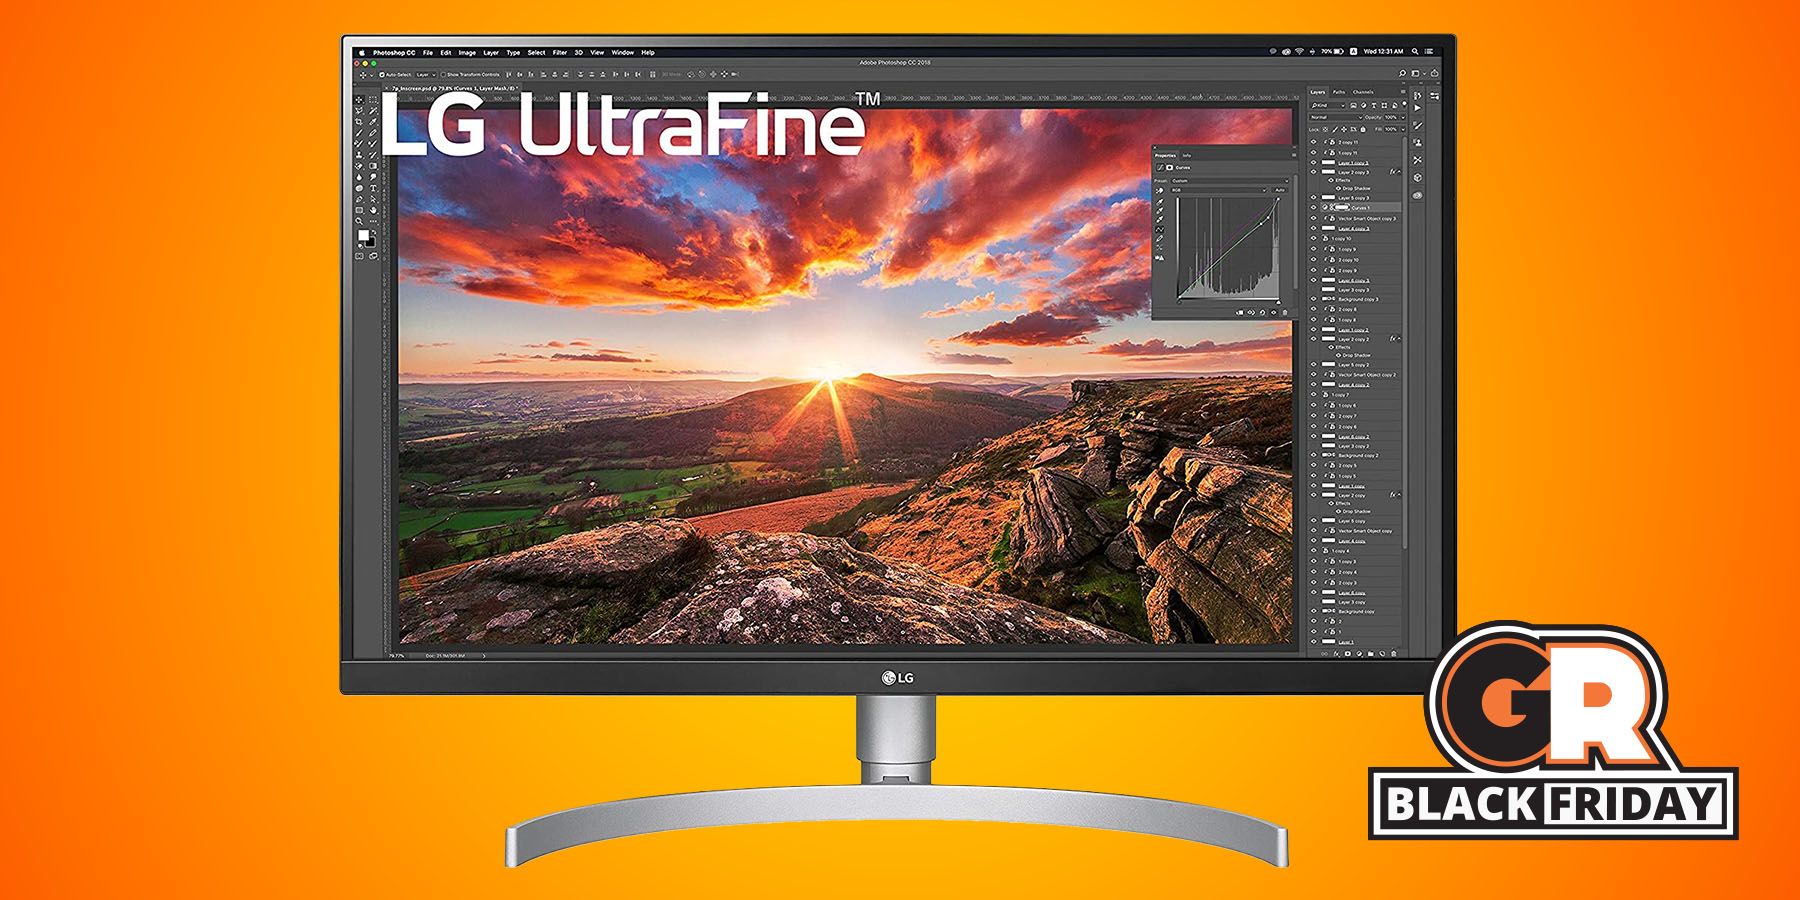 LG 27UN850-W 27-Inch Class UltraFine Computer Monitor is One of the Best Monitors Available and It's Deeply Discounted for Black Friday